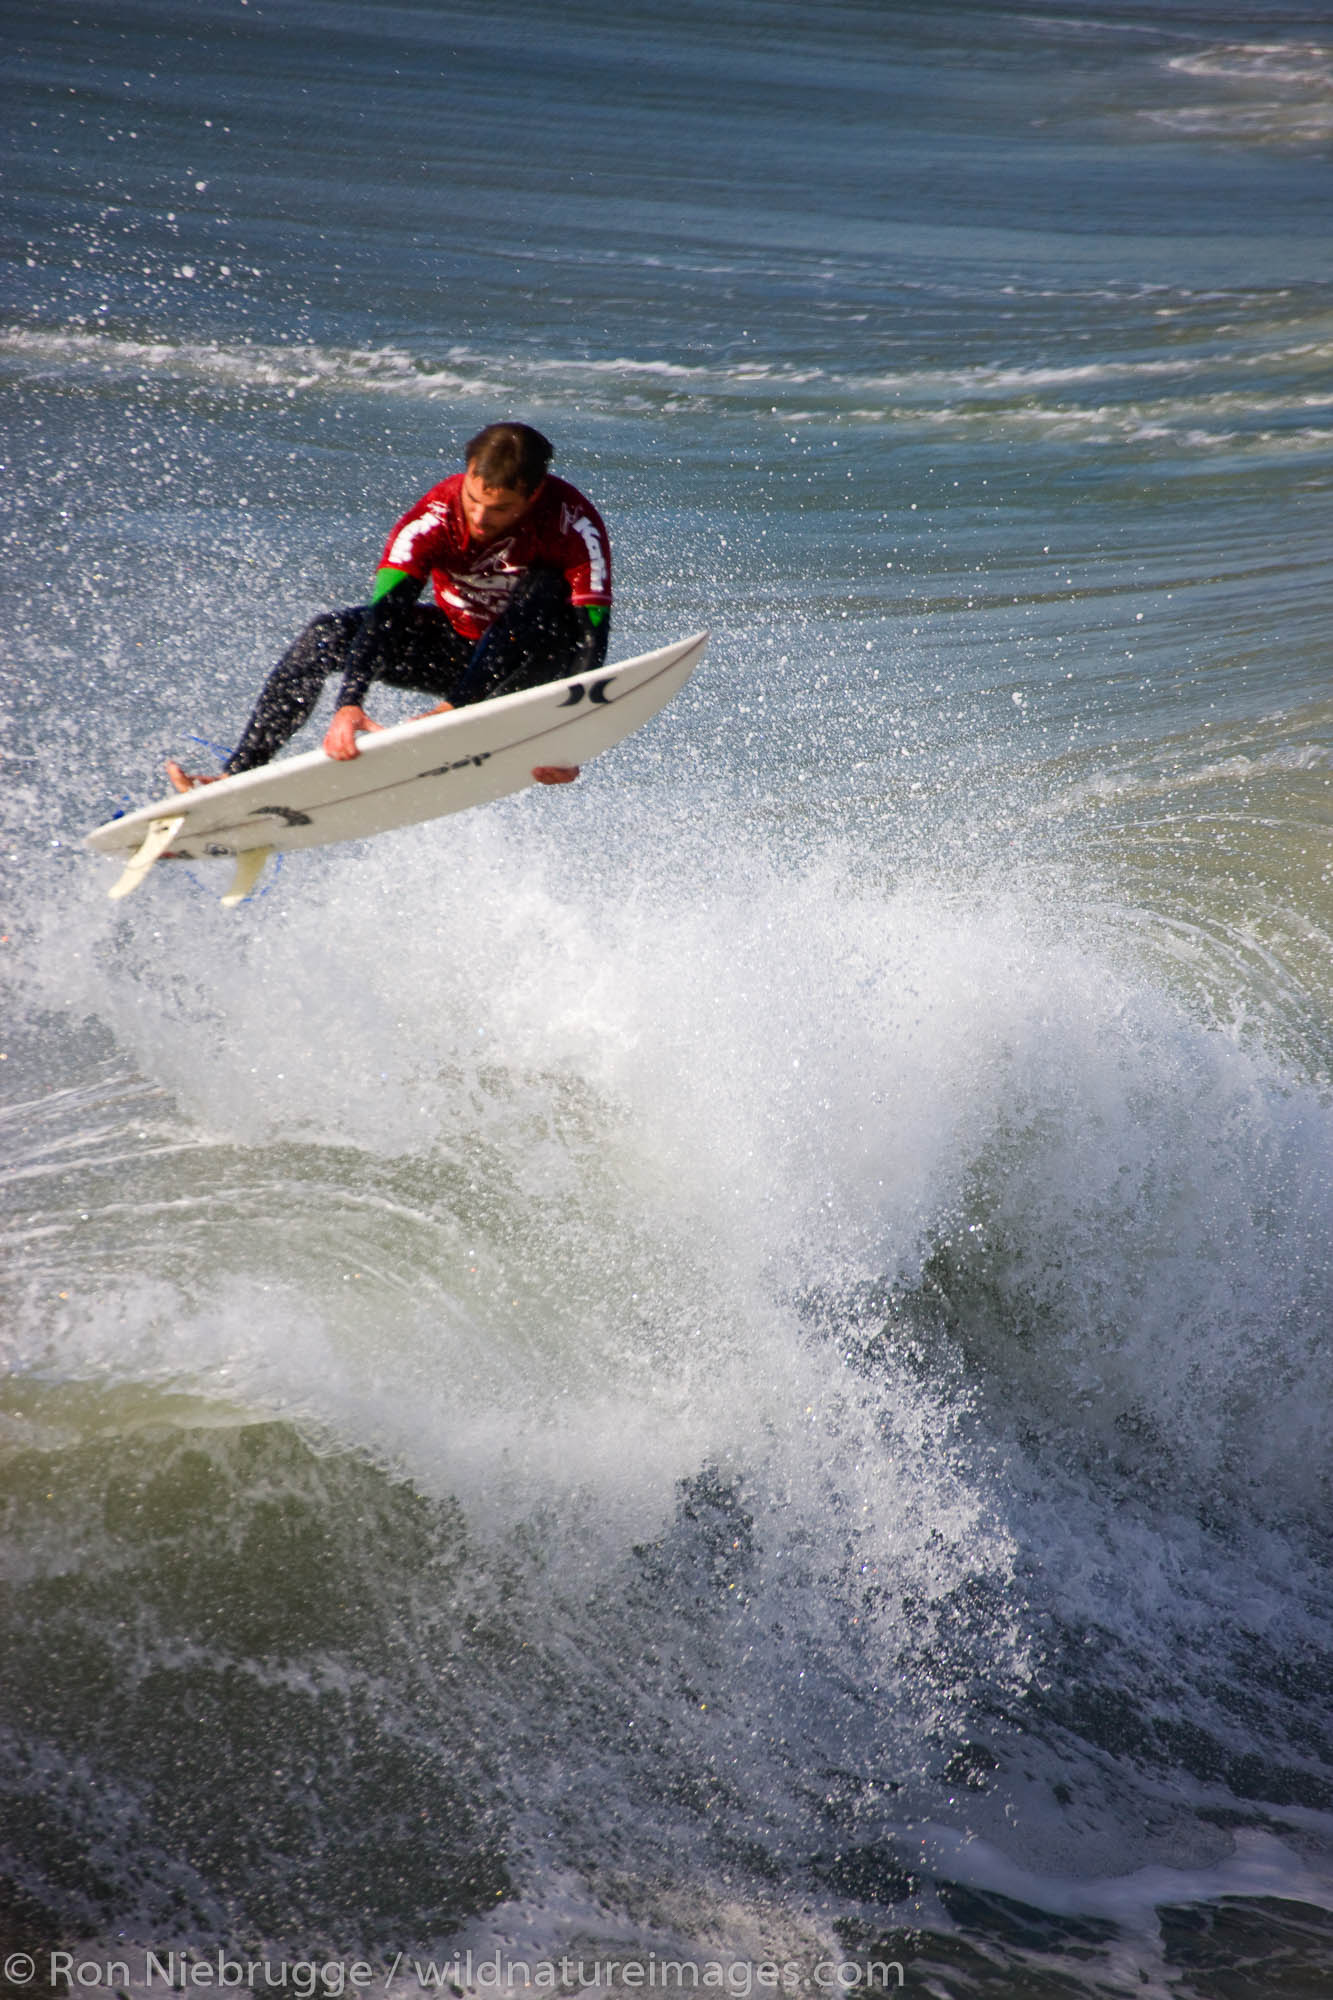 Brandon Guilmette competing in the Katin Pro/Am surf competition at Huntington Beach Pier, Orange County, California.